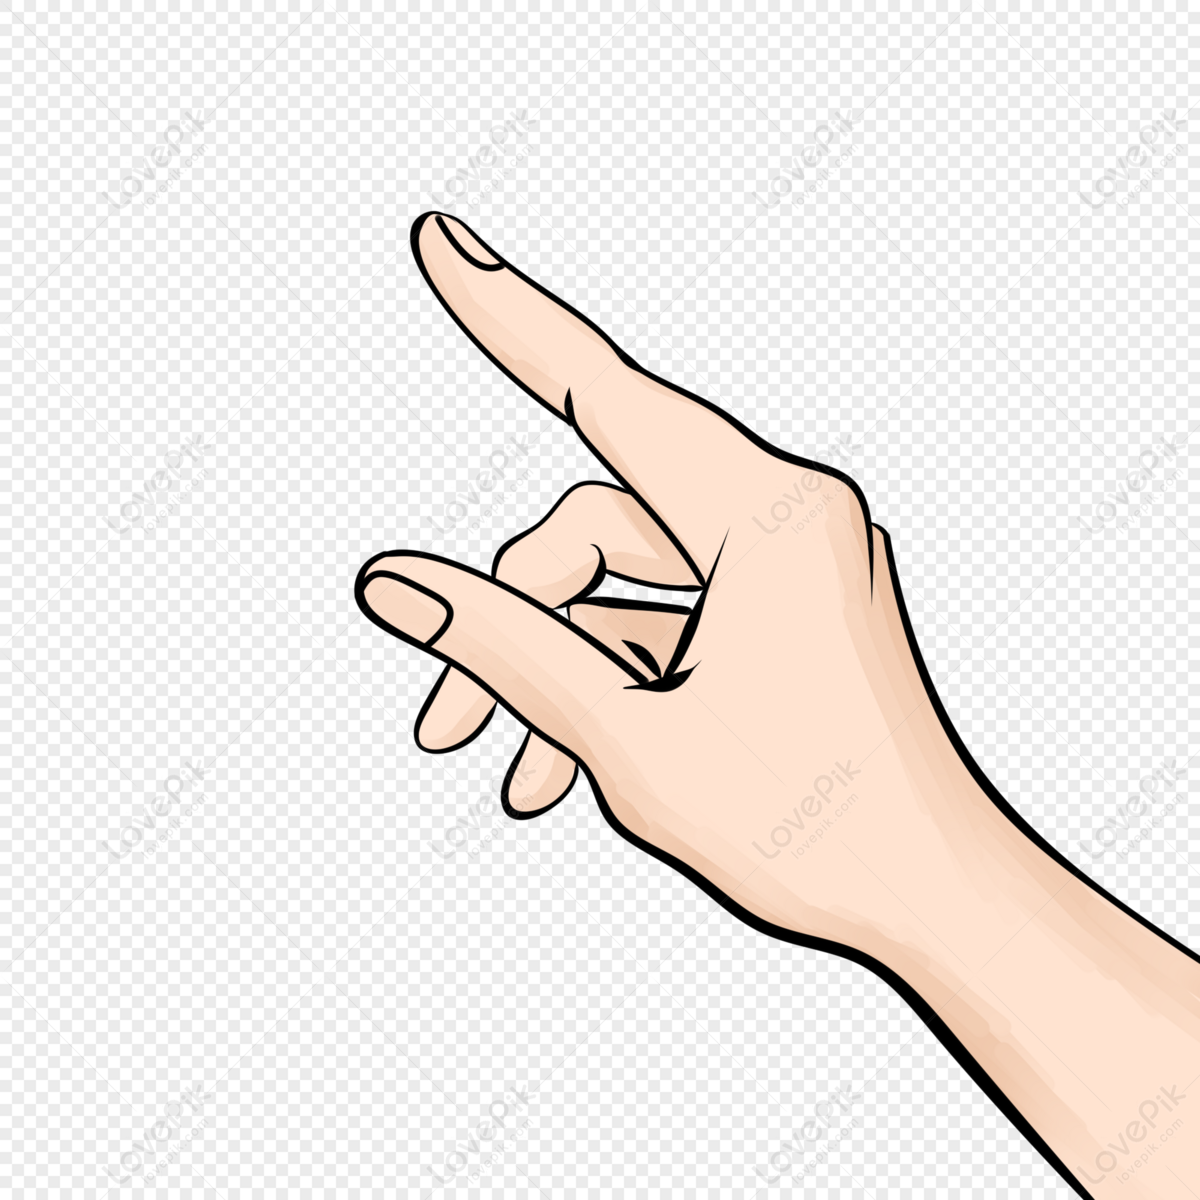 Finger Cartoon Hand Drawn Wind Indicators PNG Transparent And Clipart Image  For Free Download - Lovepik | 401009866